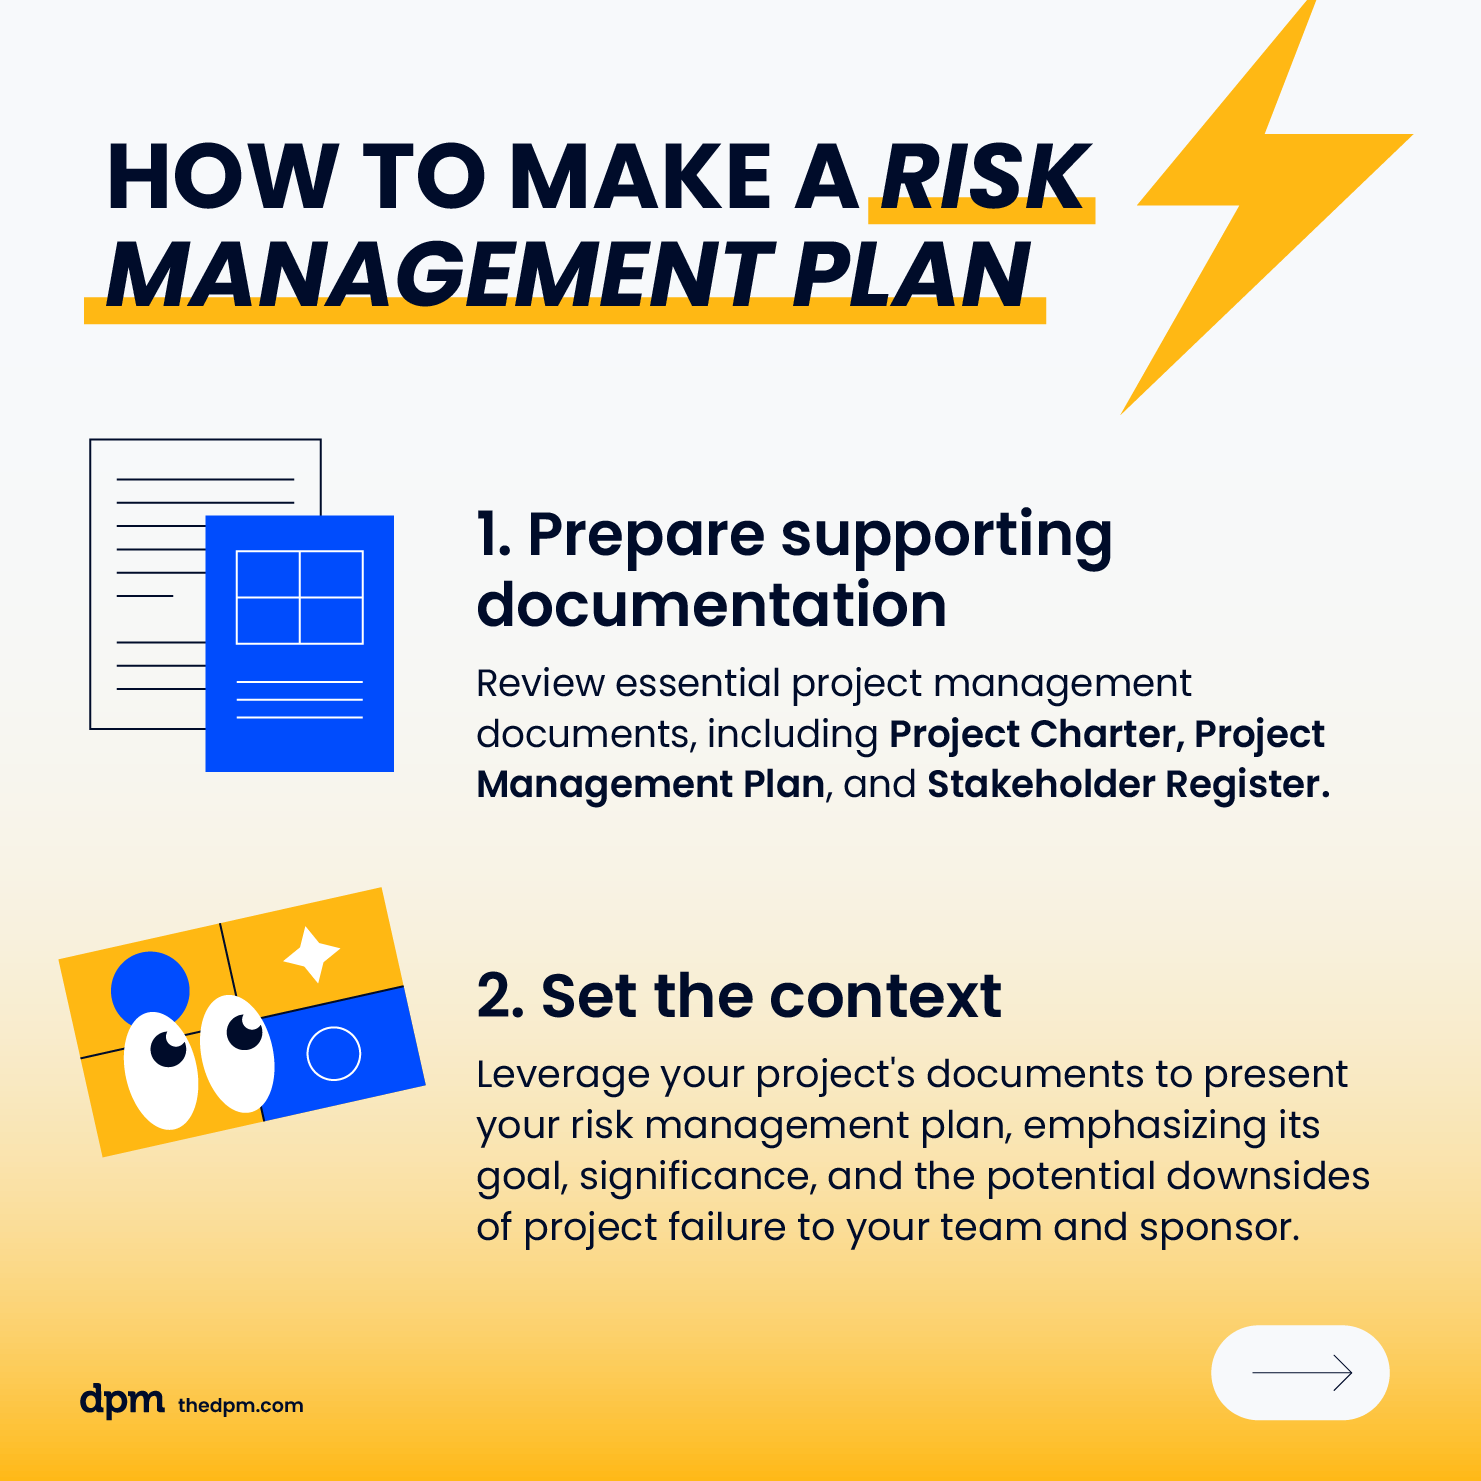 how to make a risk management plan step 1 and 2